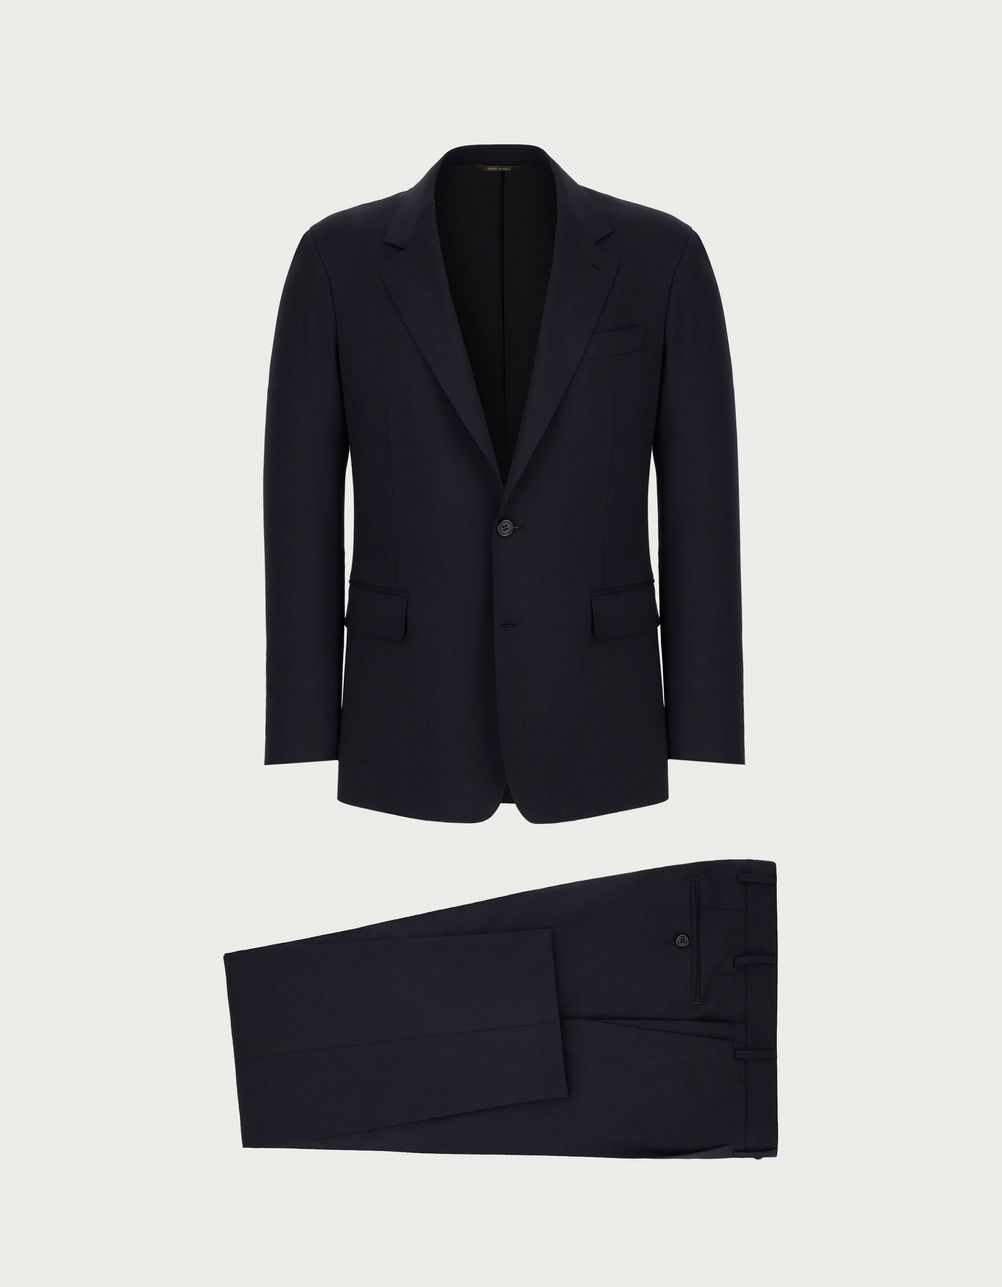 Navy blue suit in stretch wool